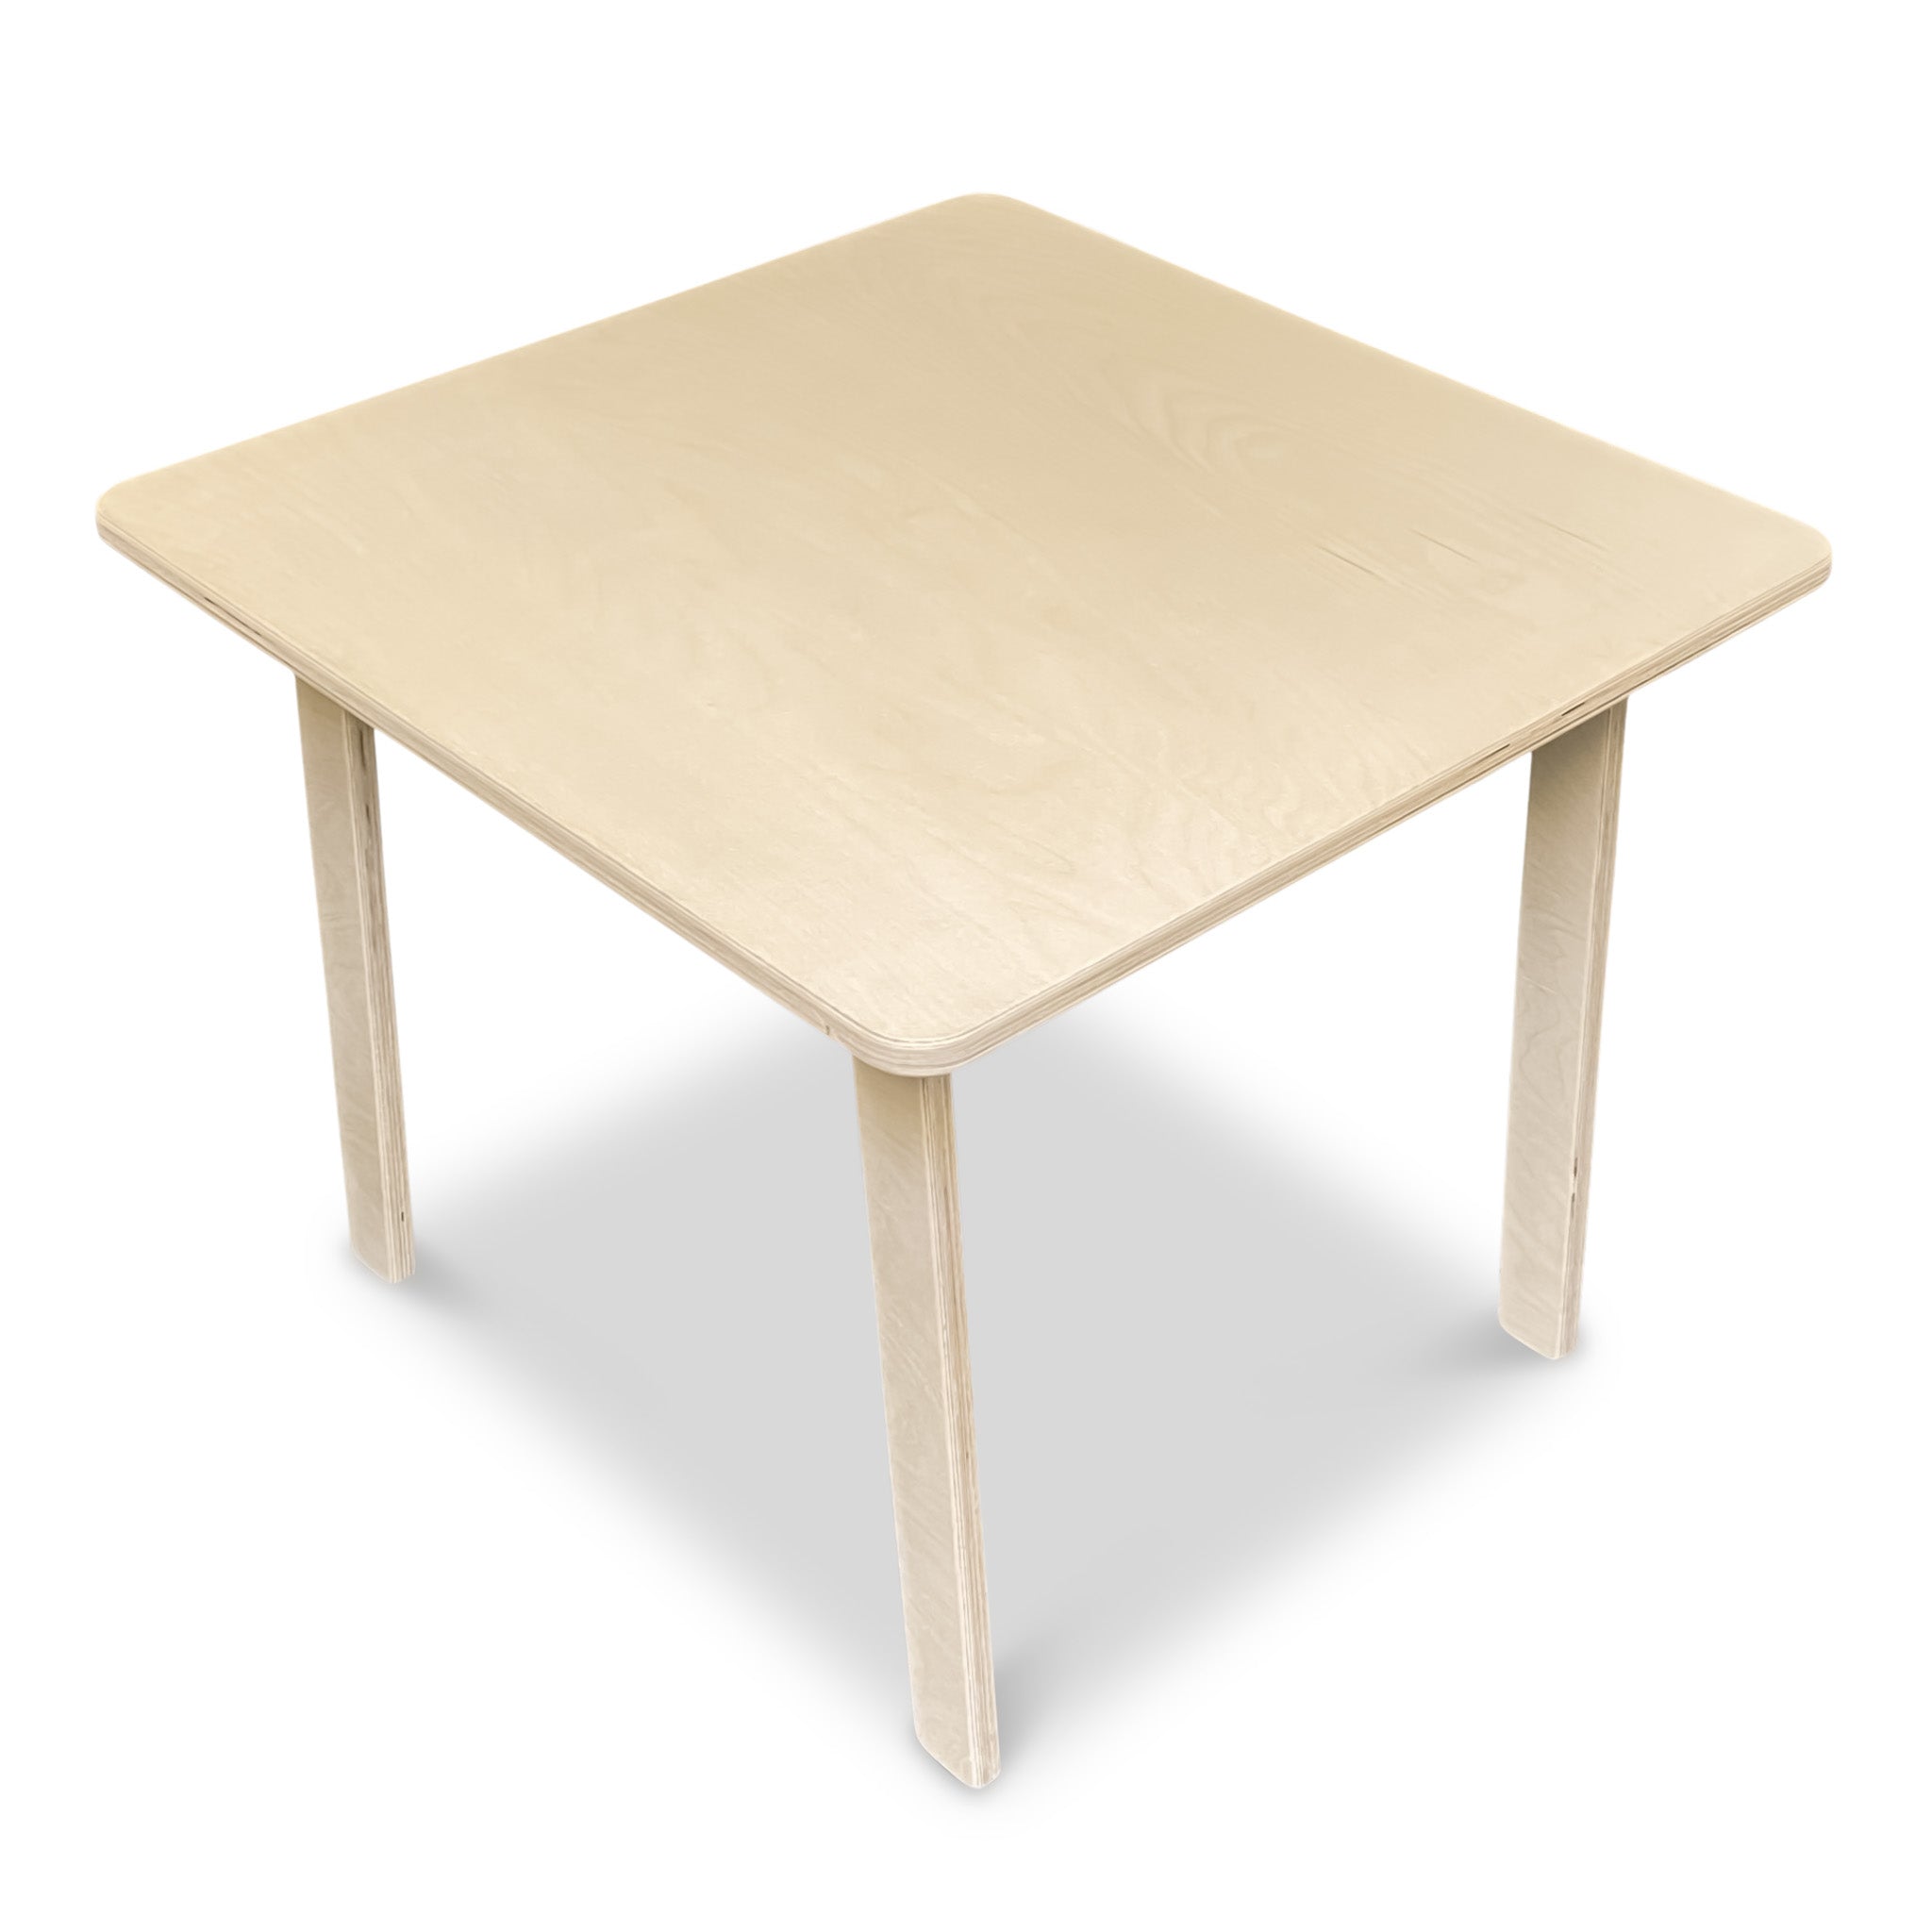 Wooden children’s table 4-7 years - natural